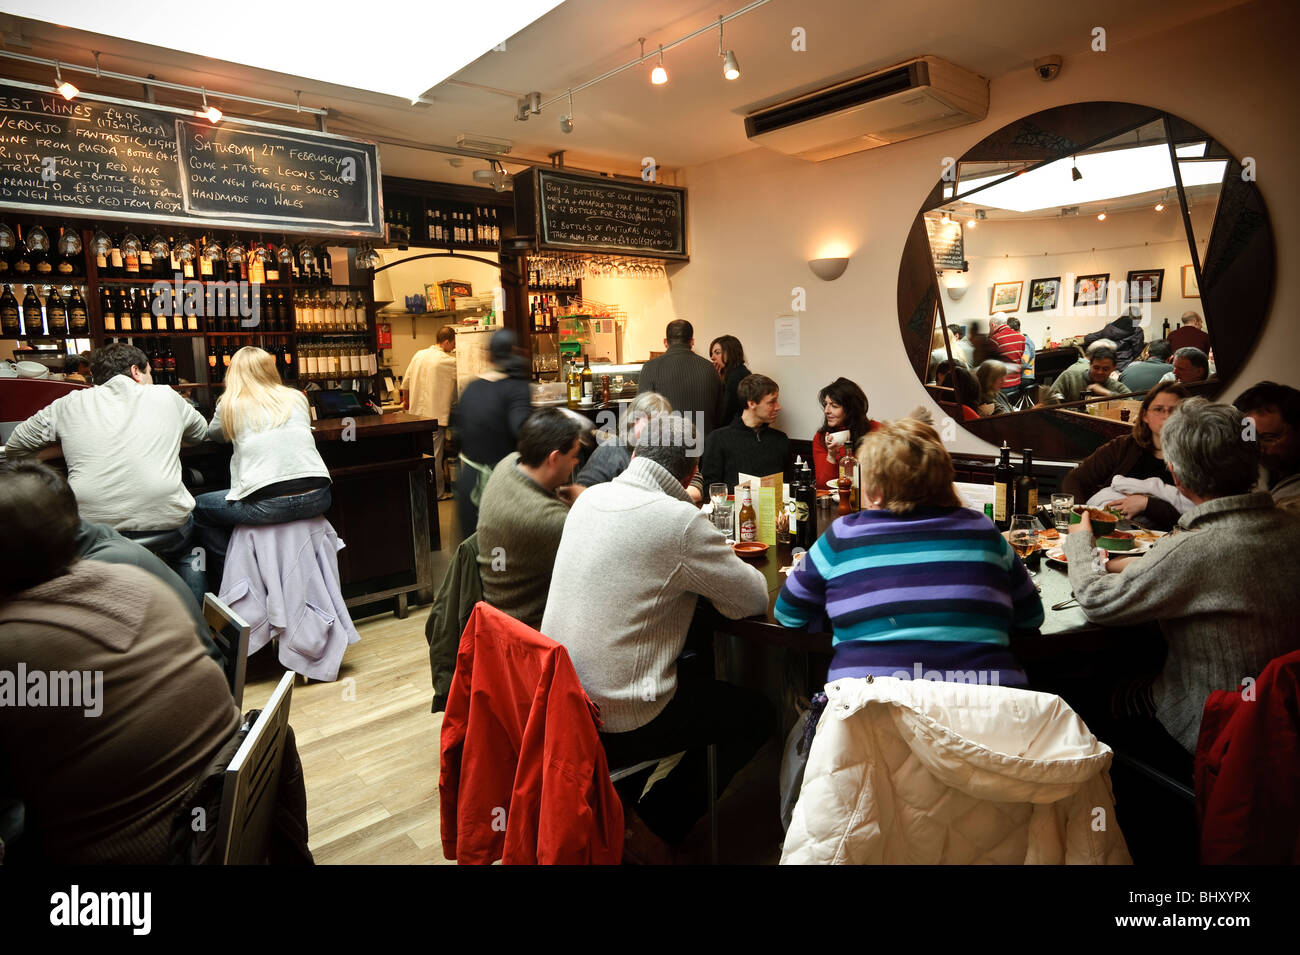 People eating lunch at Ultracomida Delicatessen and cafe tapas bar bistro, Aberystwyth Wales Stock Photo